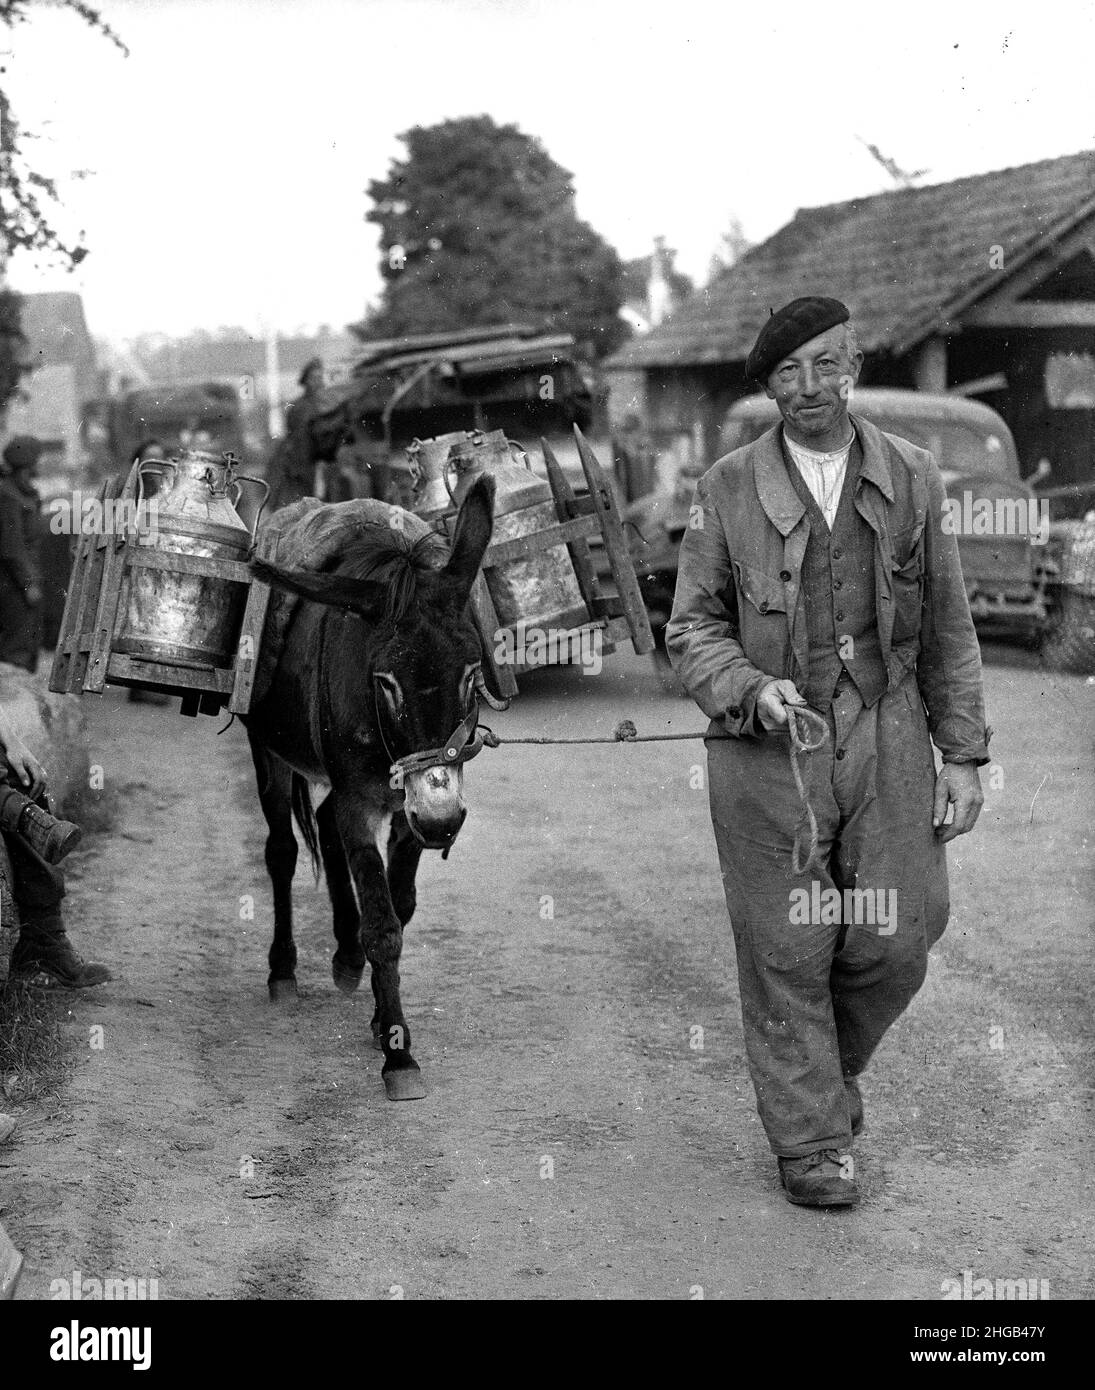 Northern France World War Two 1944 british soldiers watching French farmer delivering milk with a donkey. LARGER FILES AVAILABLE ON REQUEST Stock Photo